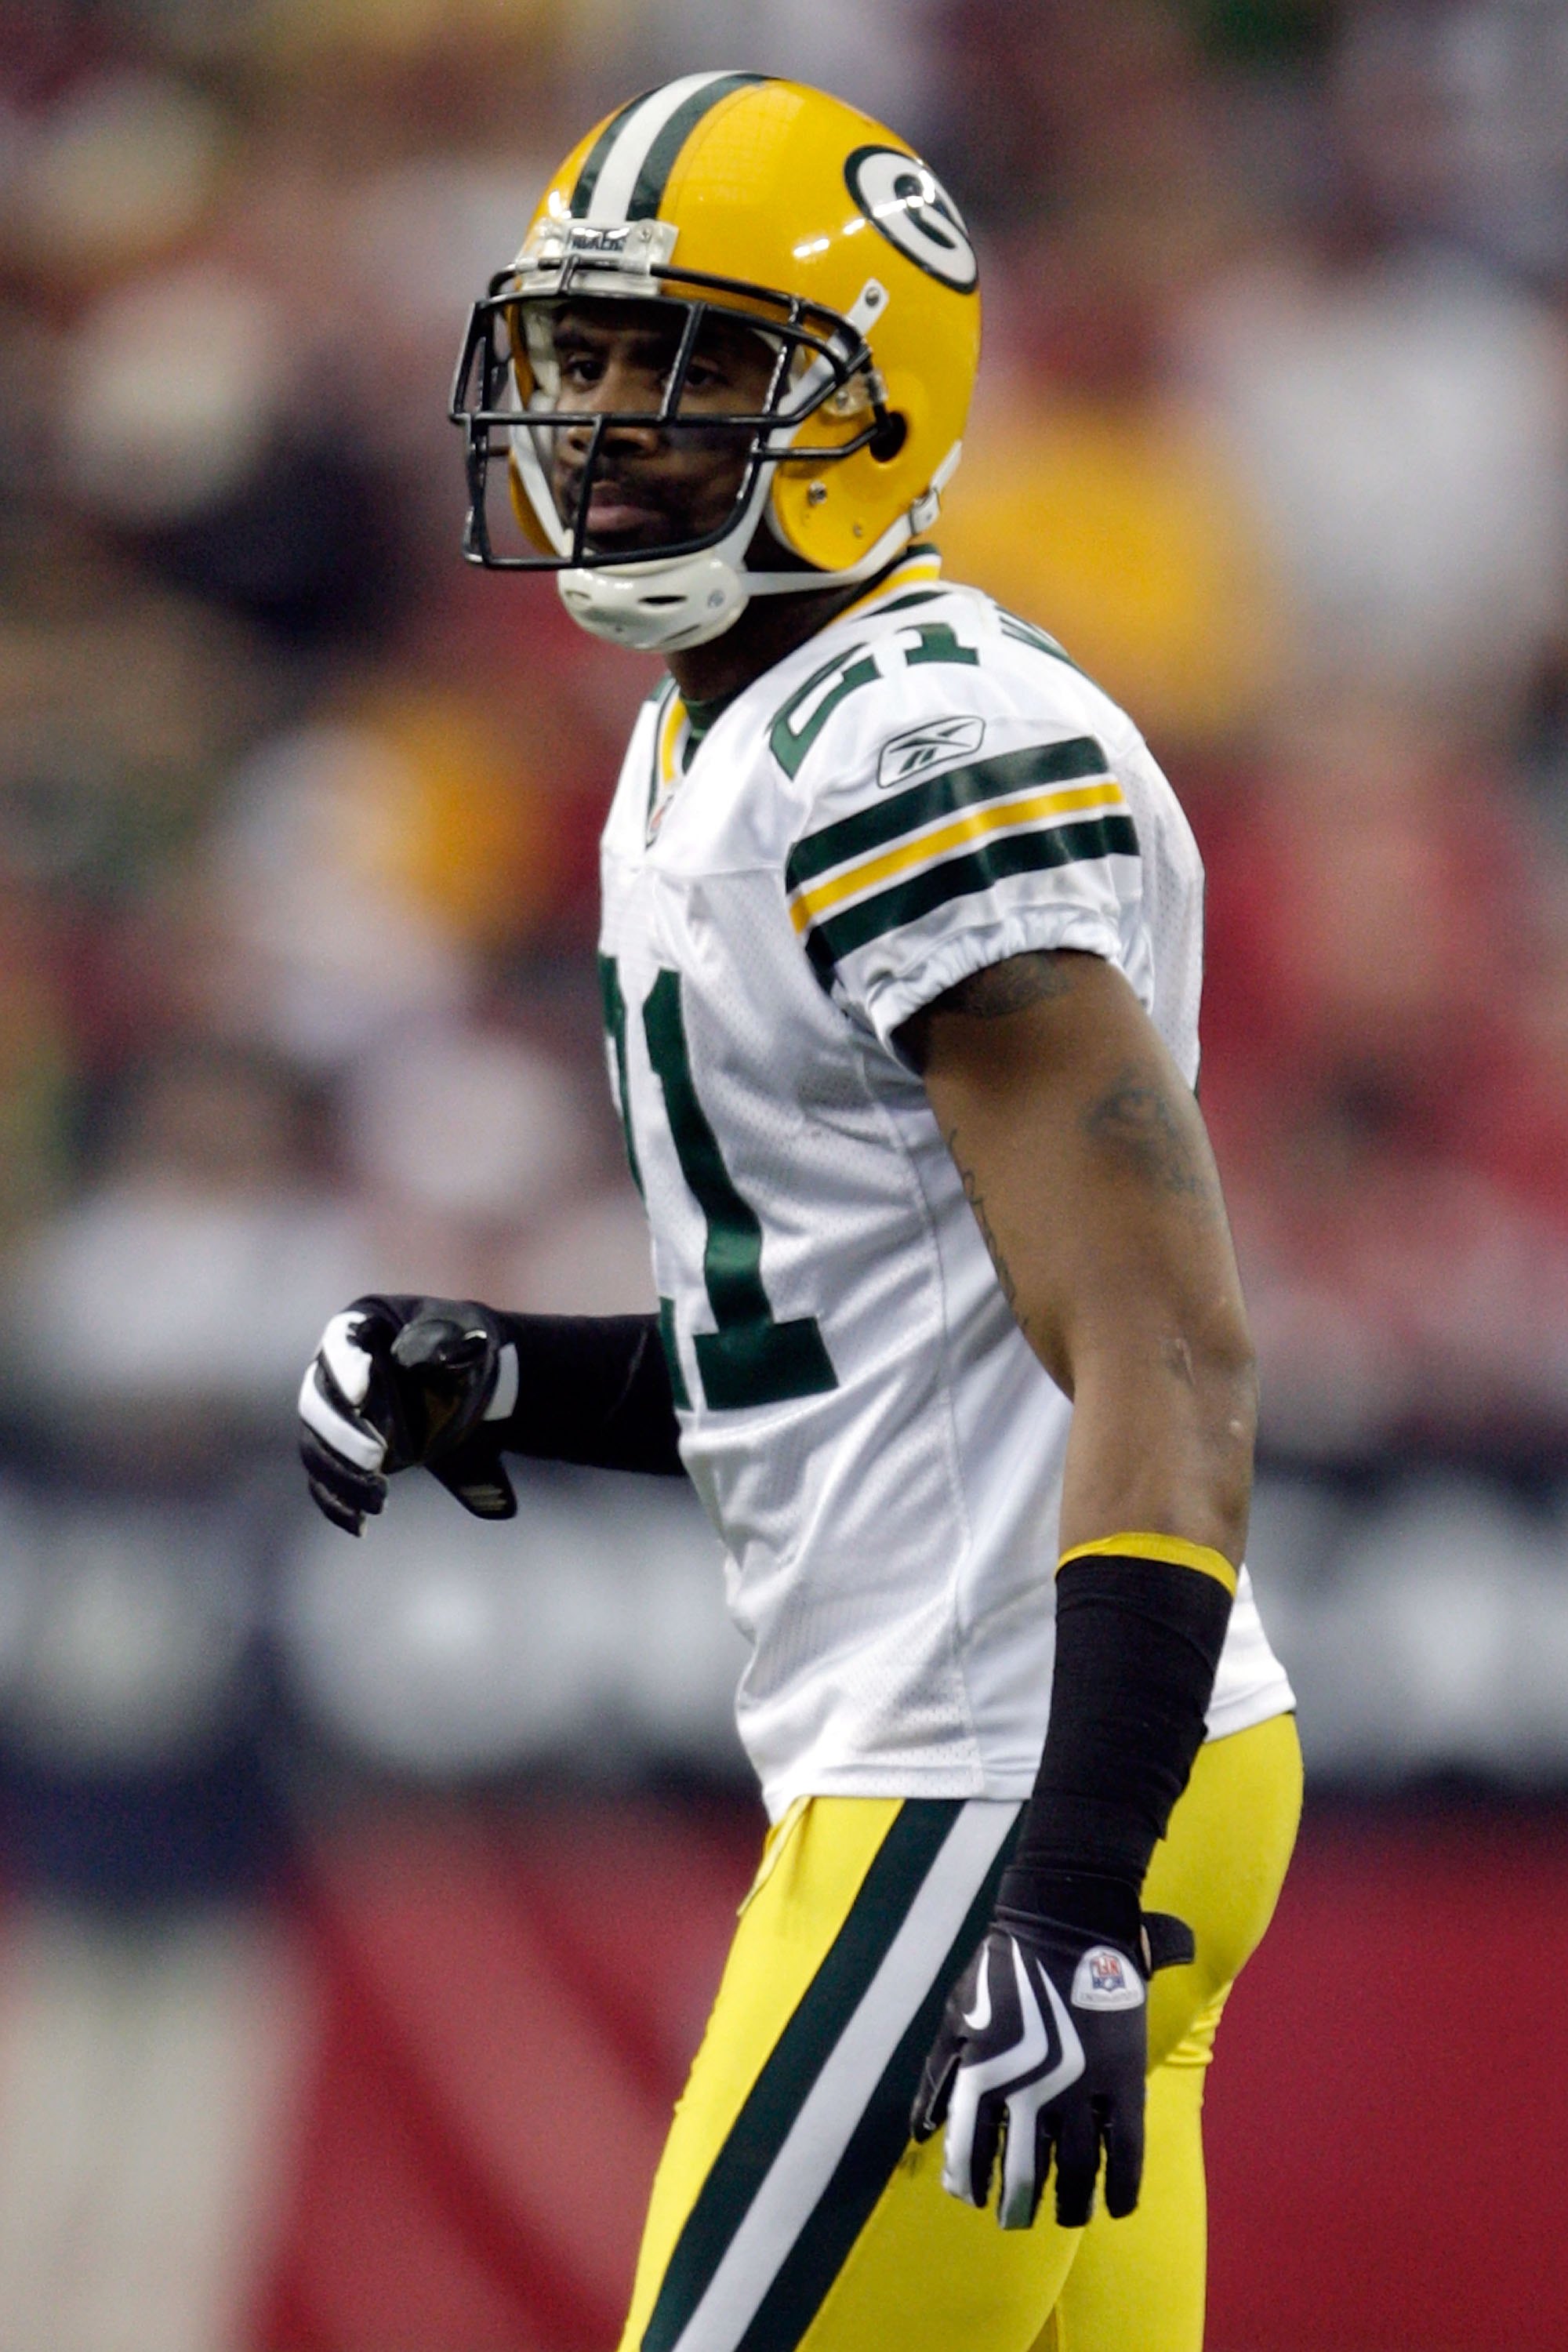 GLENDALE, AZ - JANUARY 03:  Charles Woodson #21 of the Green Bay Packers looks on from the field against the Arizona Cardinals in the second quarter at University of Phoenix Stadium on January 3, 2010 in Glendale, Arizona.  (Photo by Jamie Squire/Getty Im